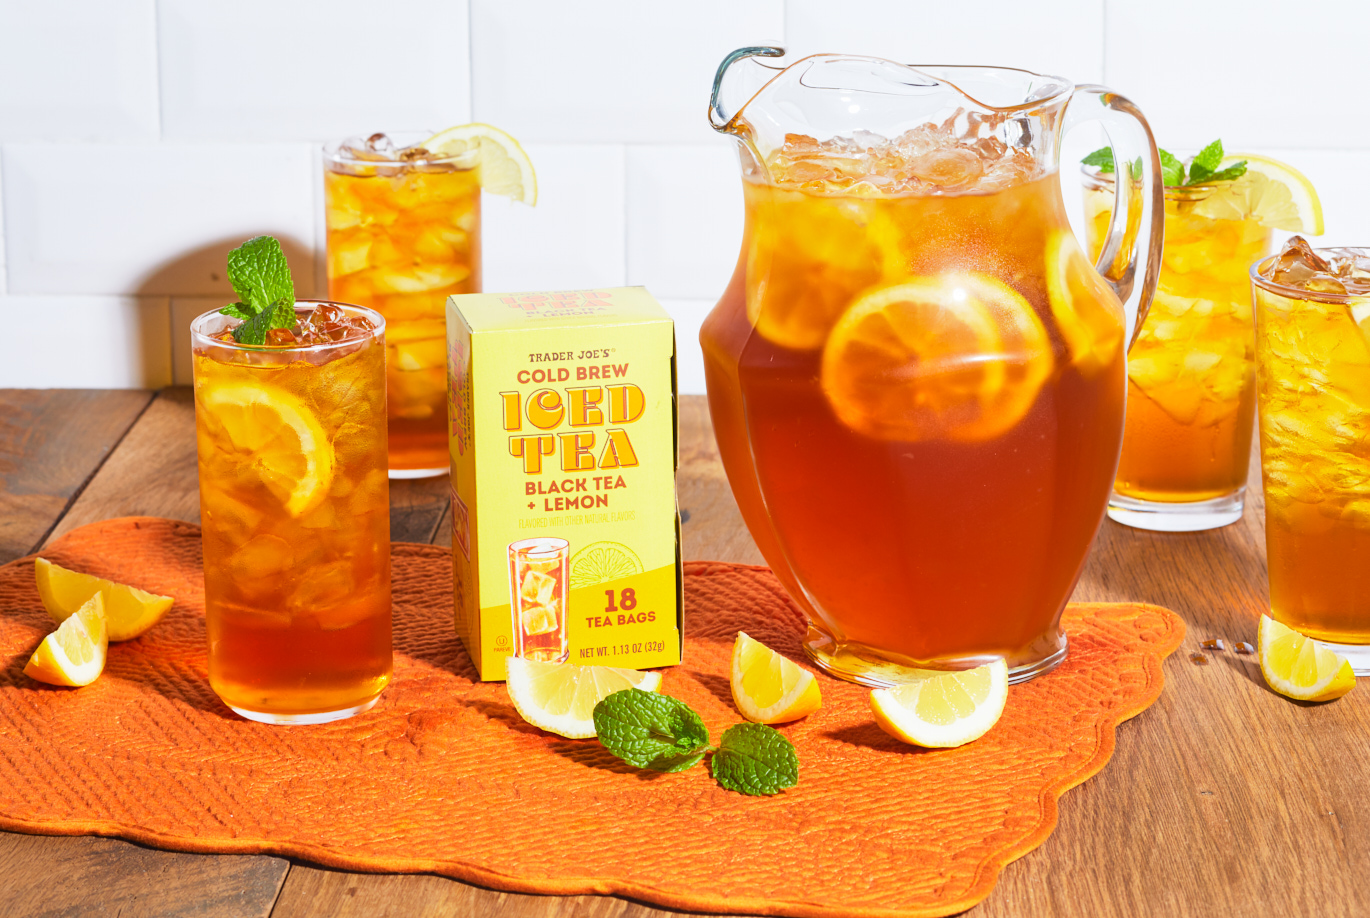 https://www.traderjoes.com/content/dam/trjo/context-images/75148-cold-brew-iced-tea-pdp.jpg